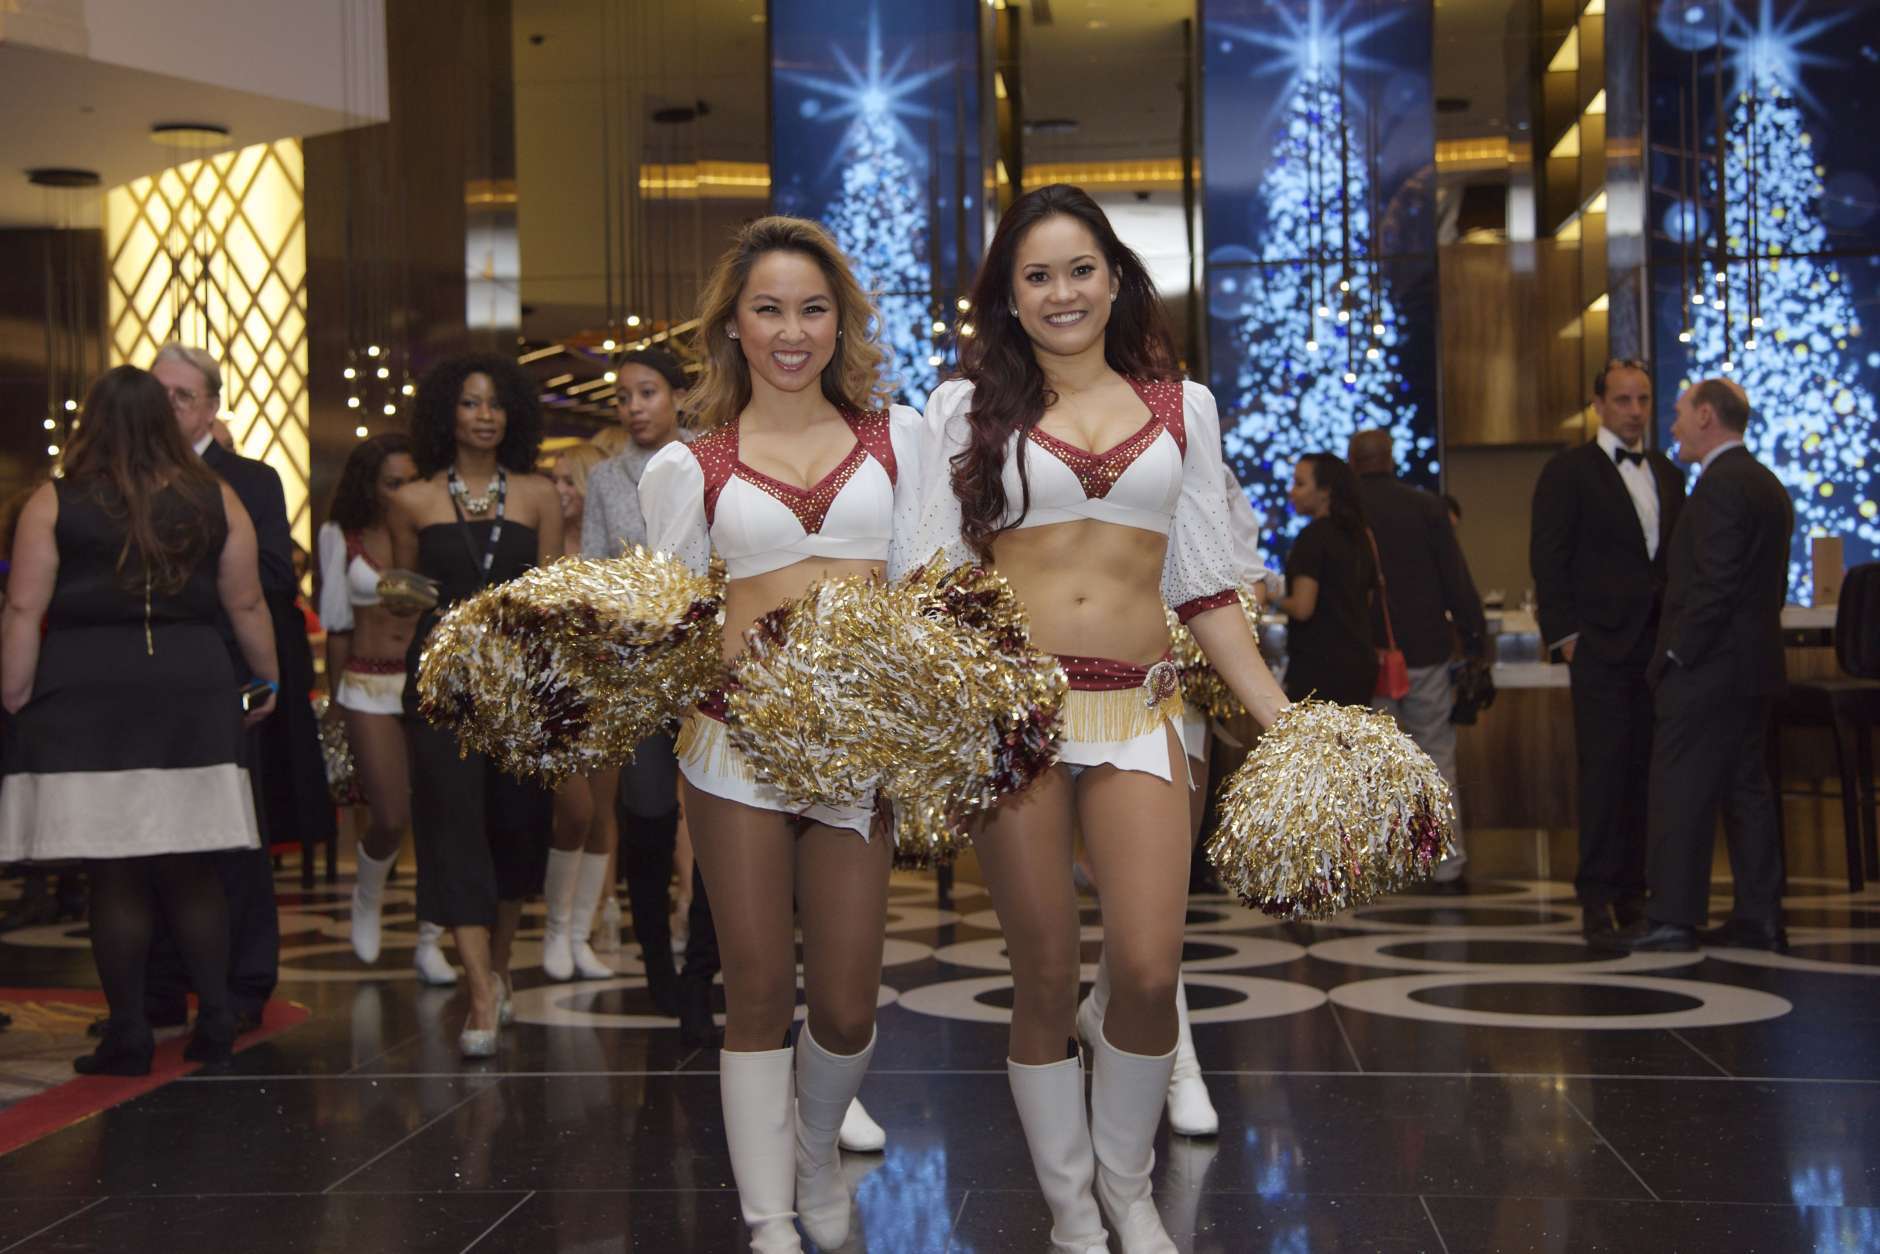 Redskins Cheerleaders led an employee parade at the grand opening of MGM National Harbor in December 2016, (Courtesy MGM National Harbor)